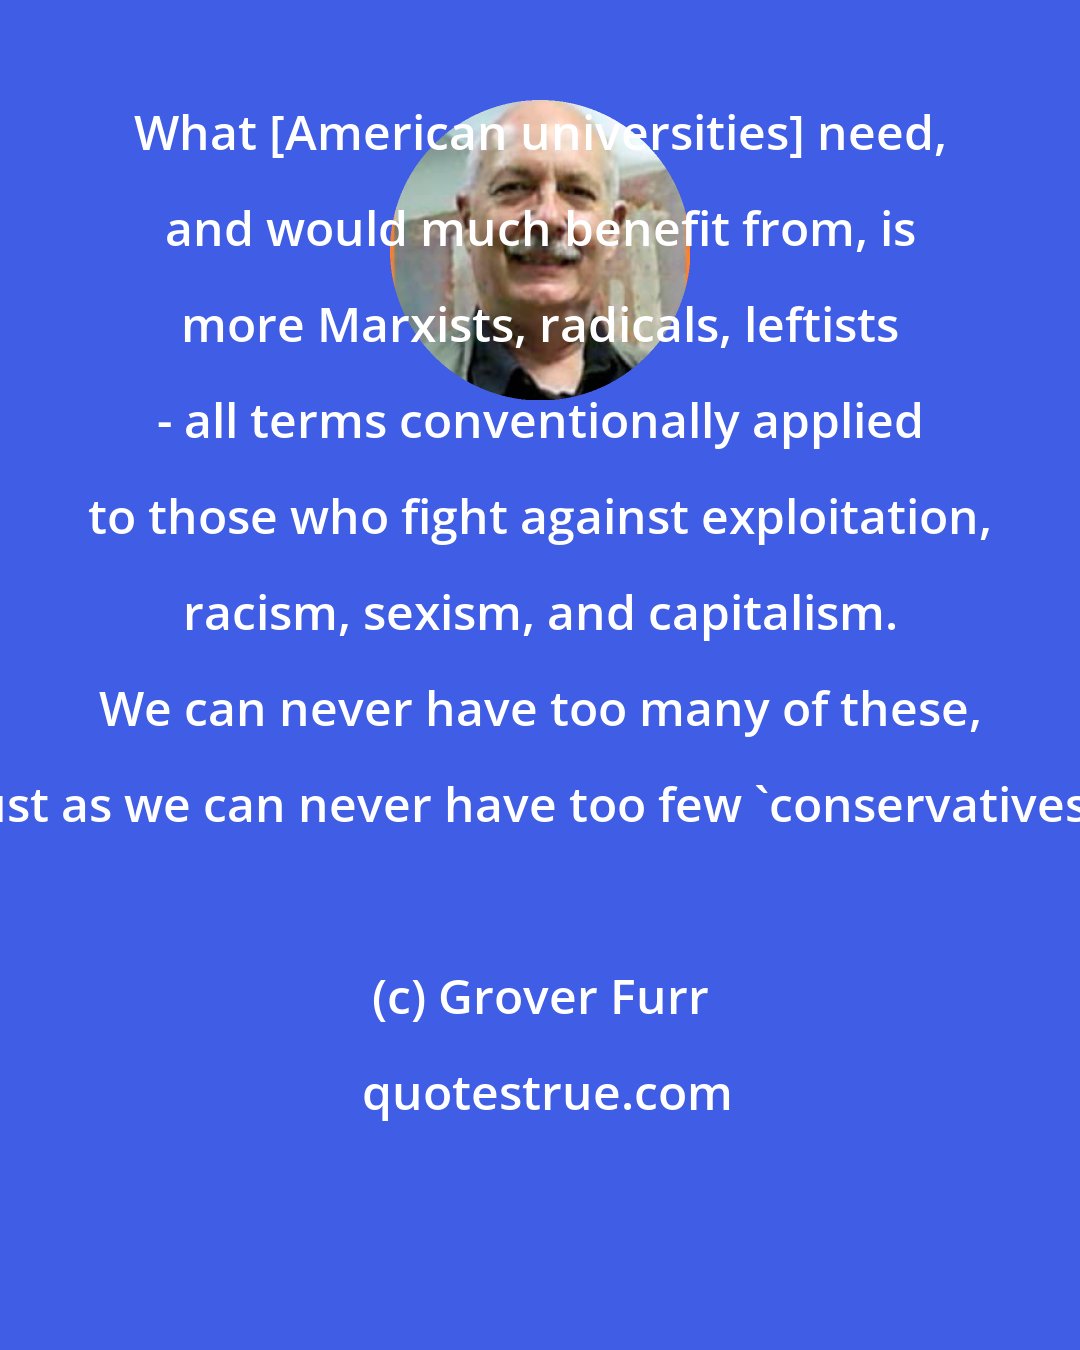 Grover Furr: What [American universities] need, and would much benefit from, is more Marxists, radicals, leftists - all terms conventionally applied to those who fight against exploitation, racism, sexism, and capitalism. We can never have too many of these, just as we can never have too few 'conservatives'.